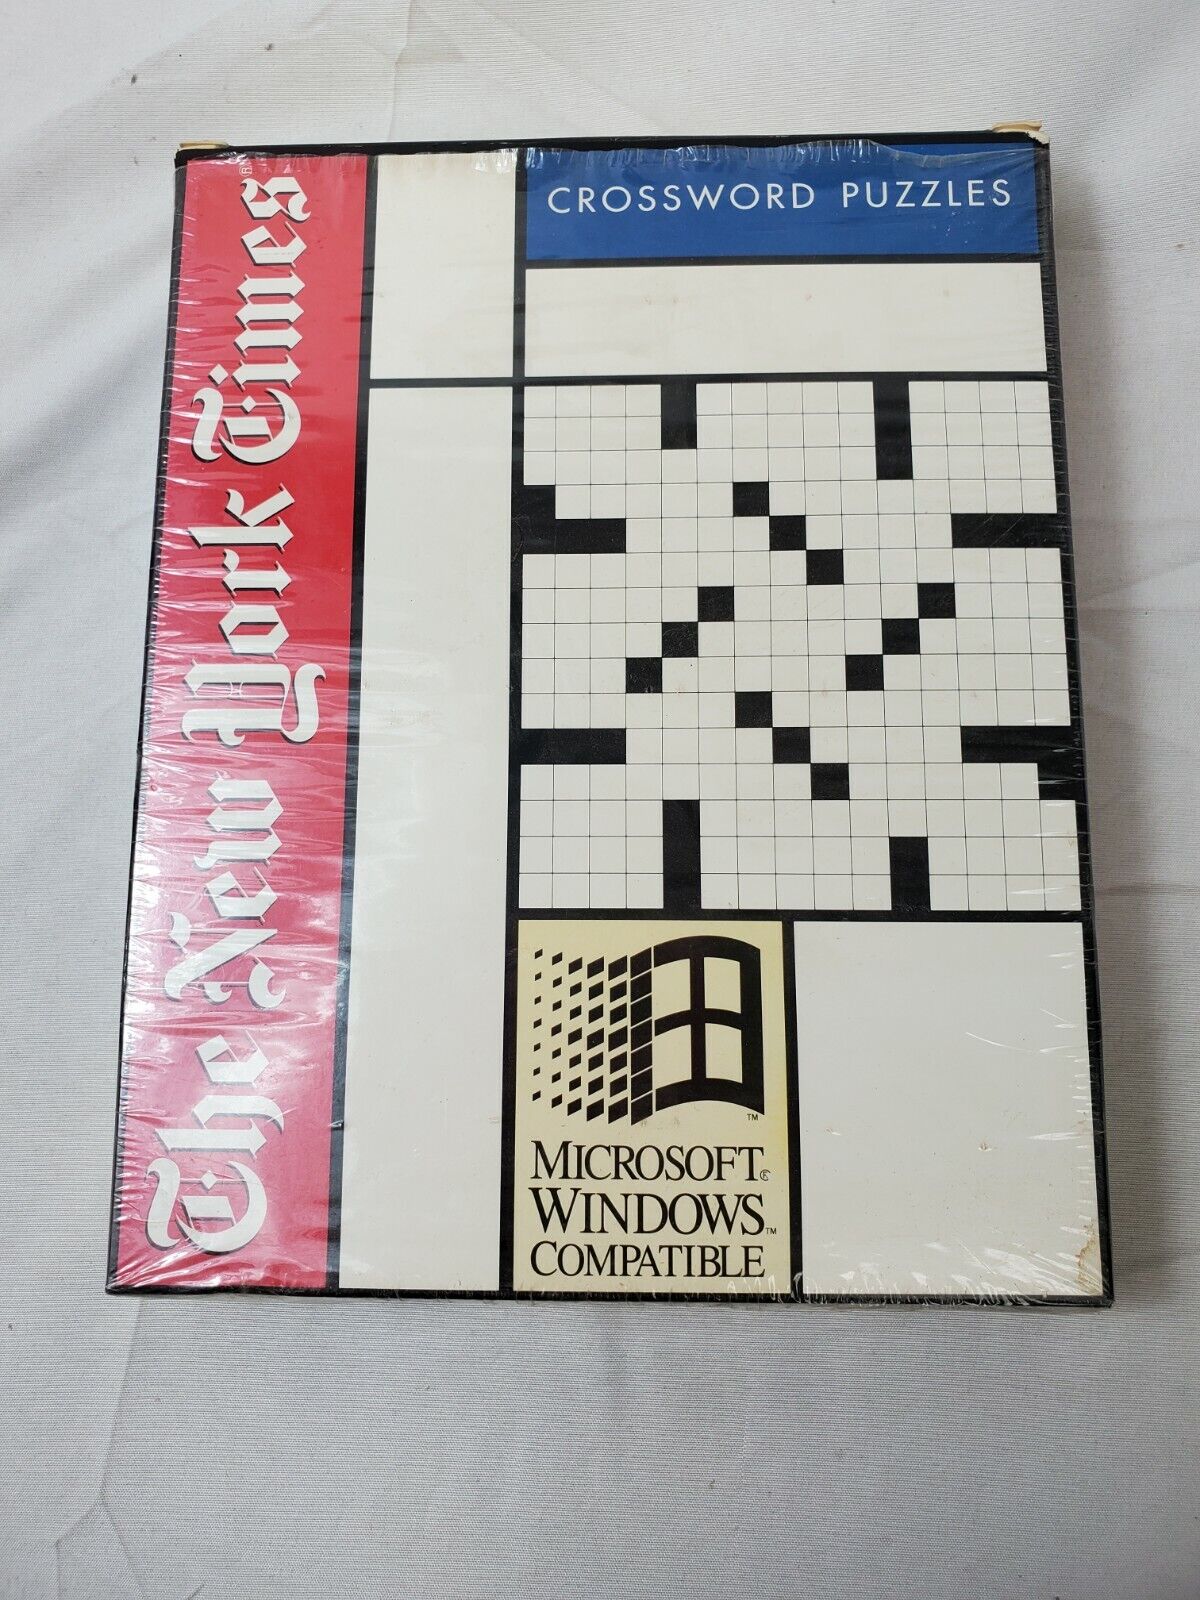 NEW YORK TIMES CROSSWORD PUZZLES PC SOFTWARE Big Box computer 1994